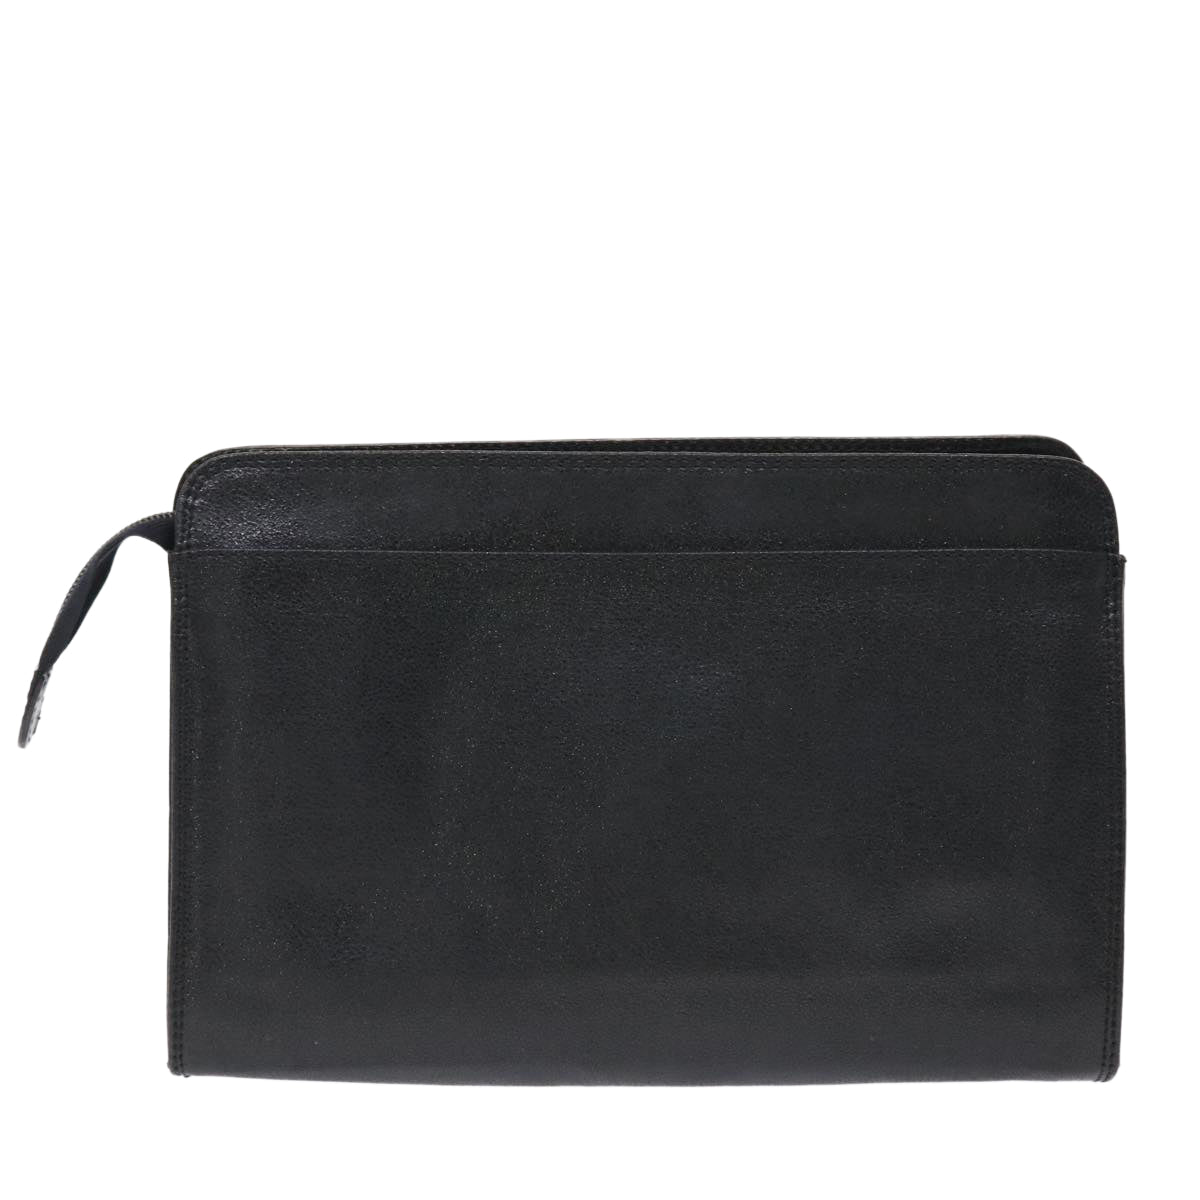 VALENTINO Clutch Bag Leather Black Auth bs7149 - 0